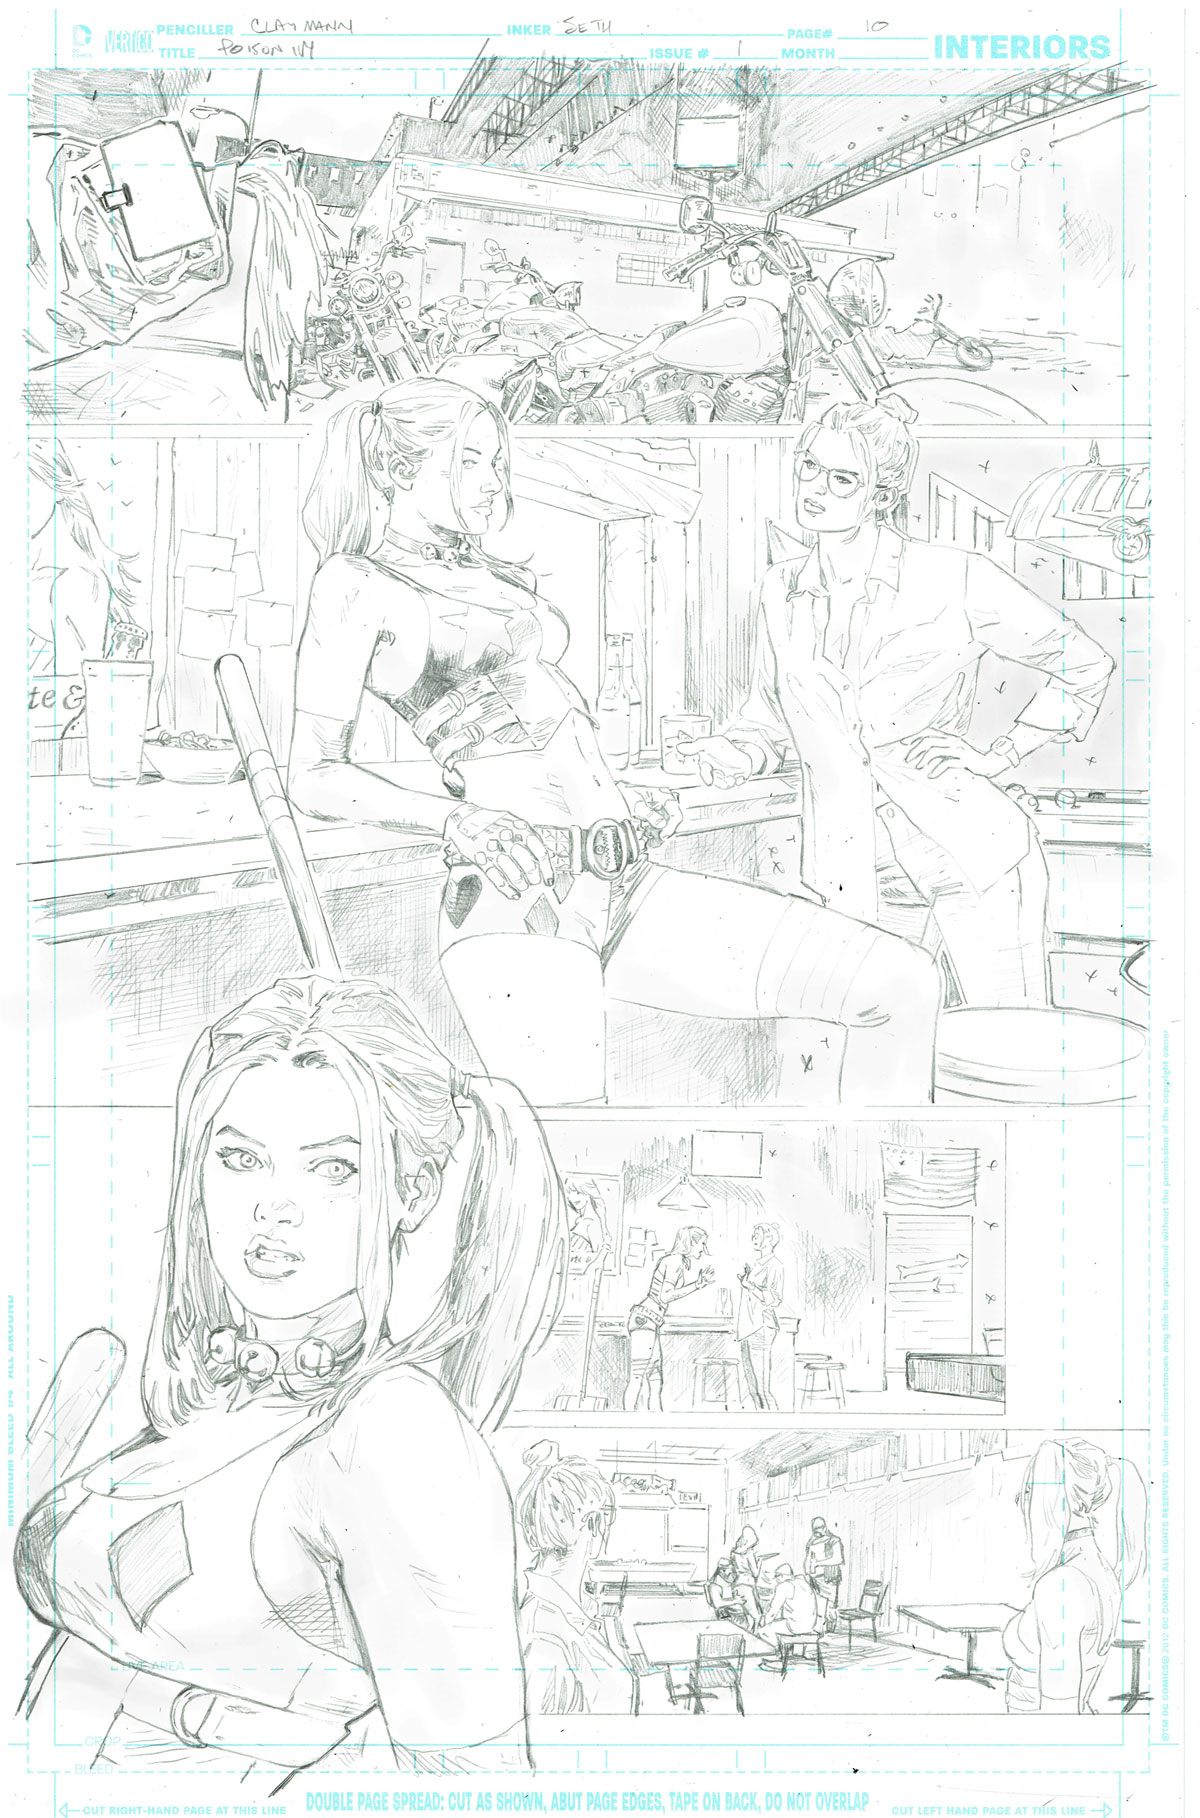 Issue #1 splash page 10 pencils by Clay Mann